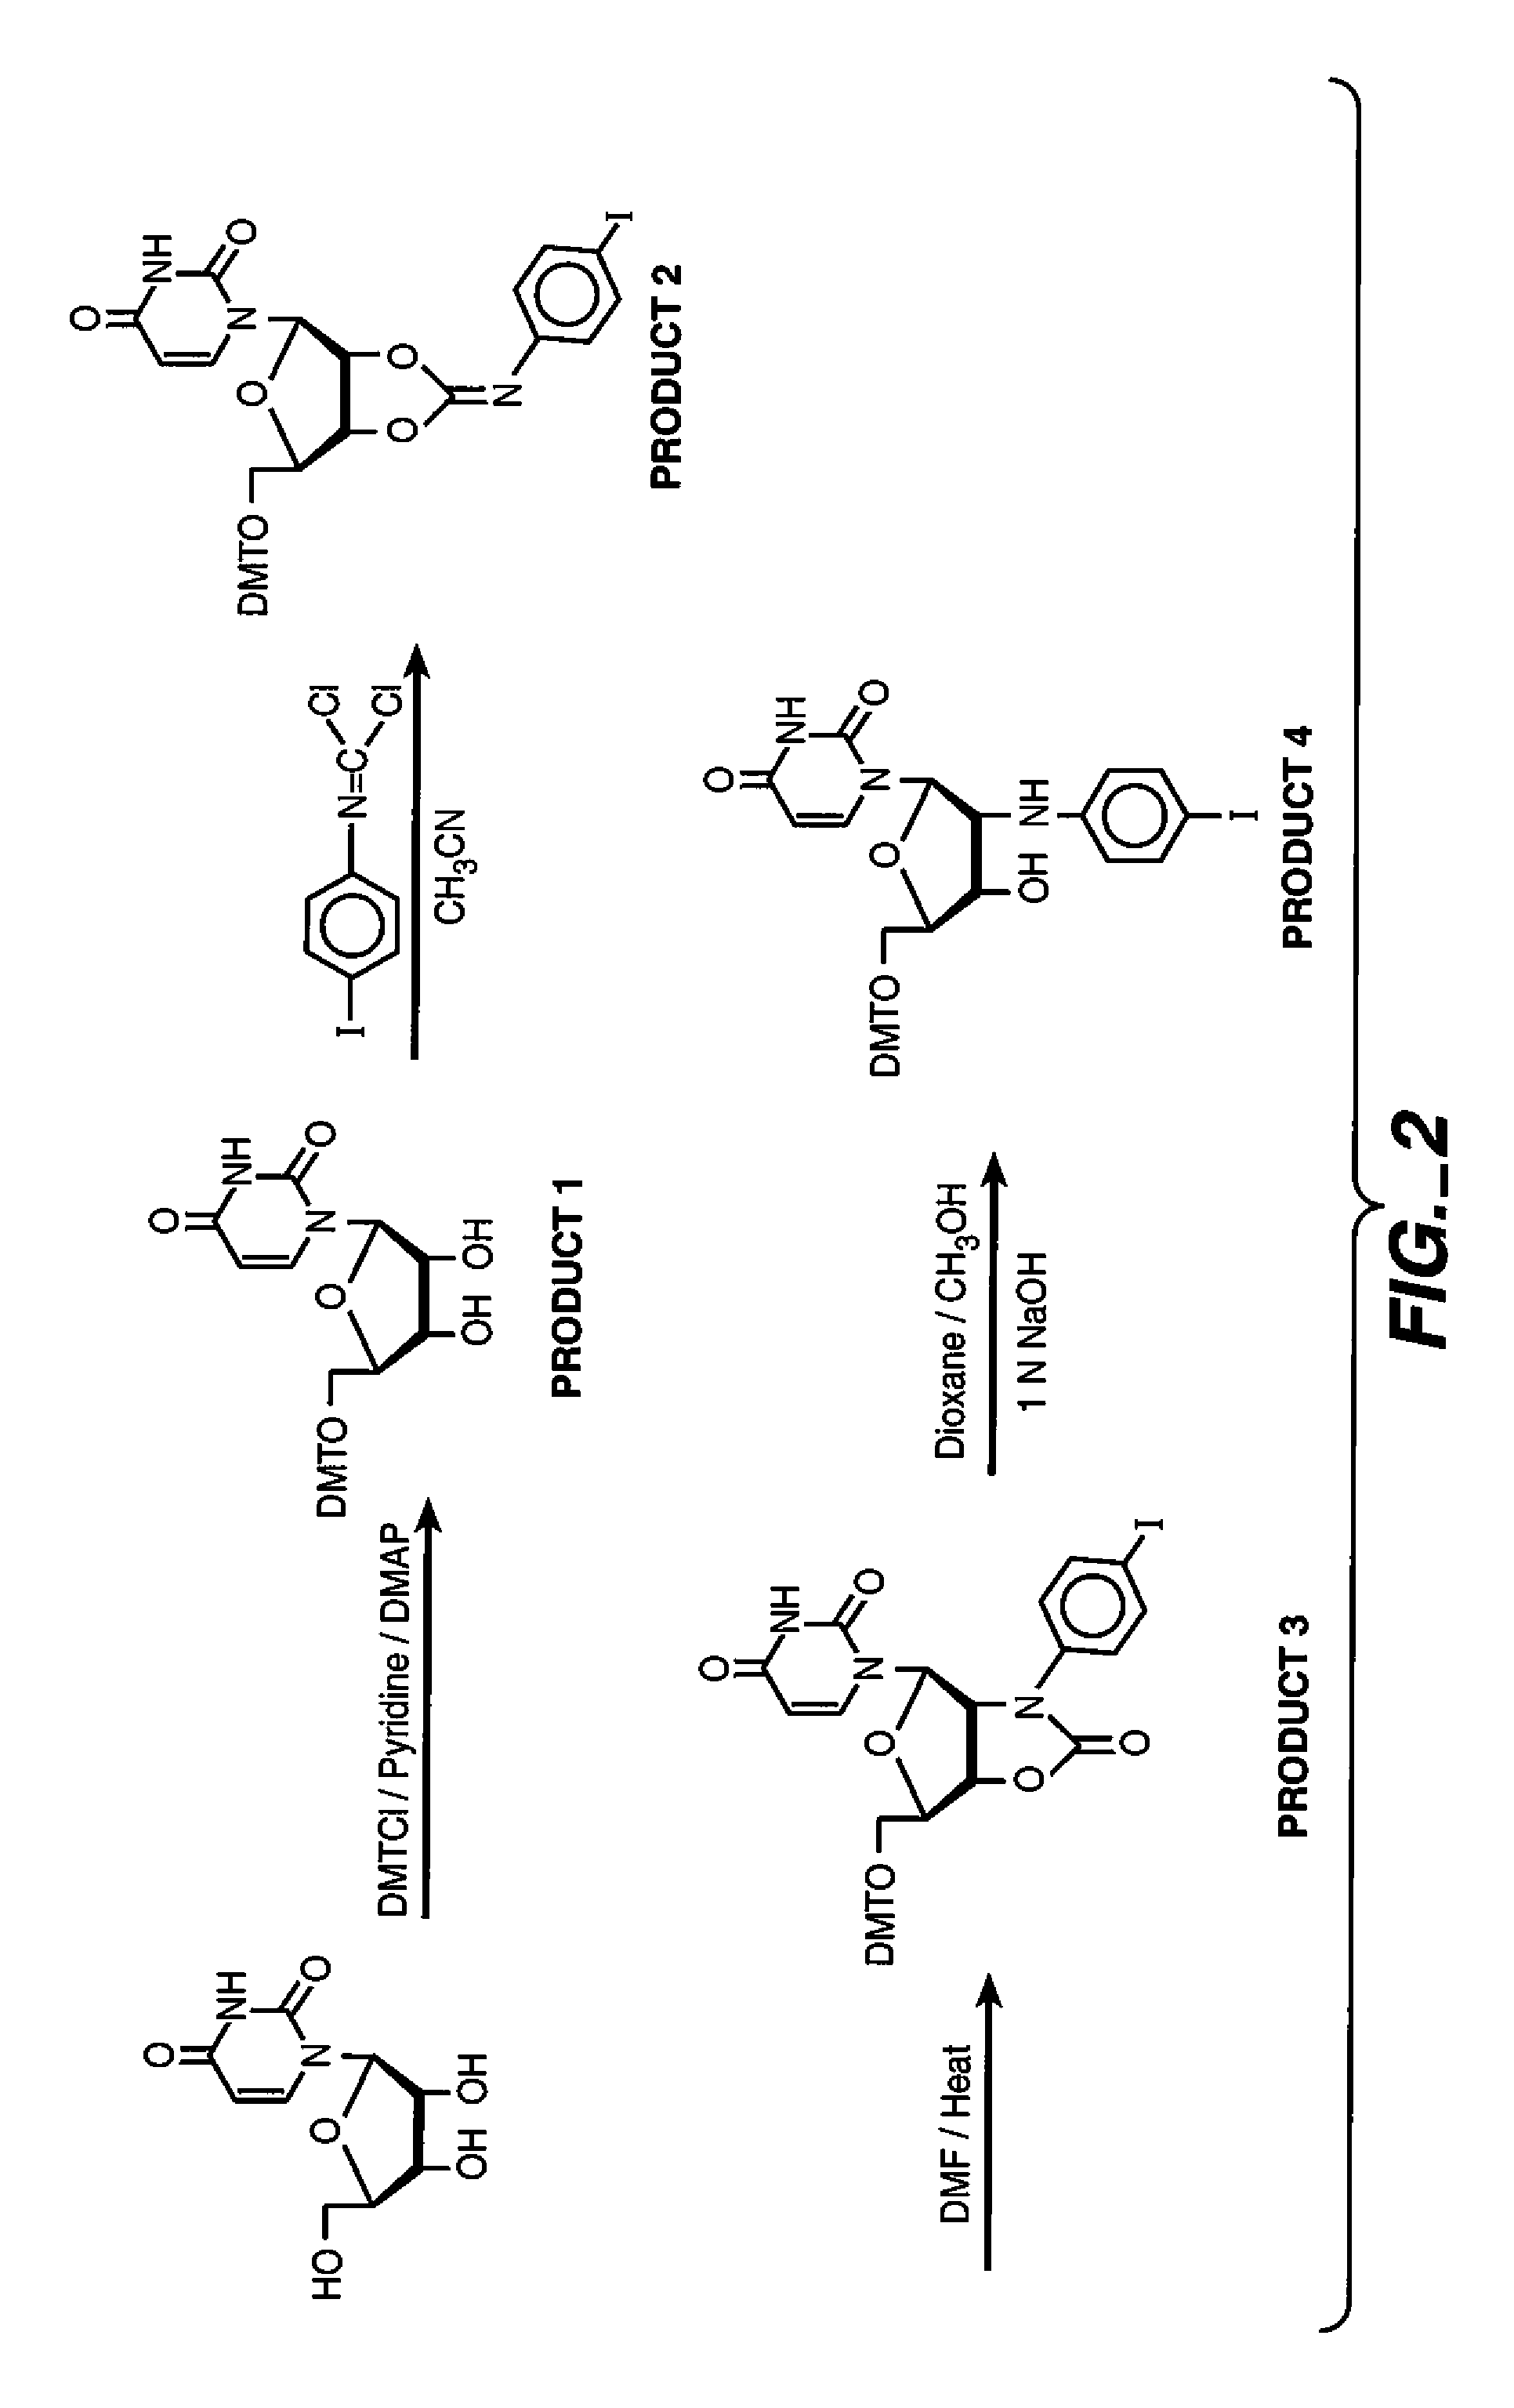 AC/DC voltage apparatus for detection of nucleic acids